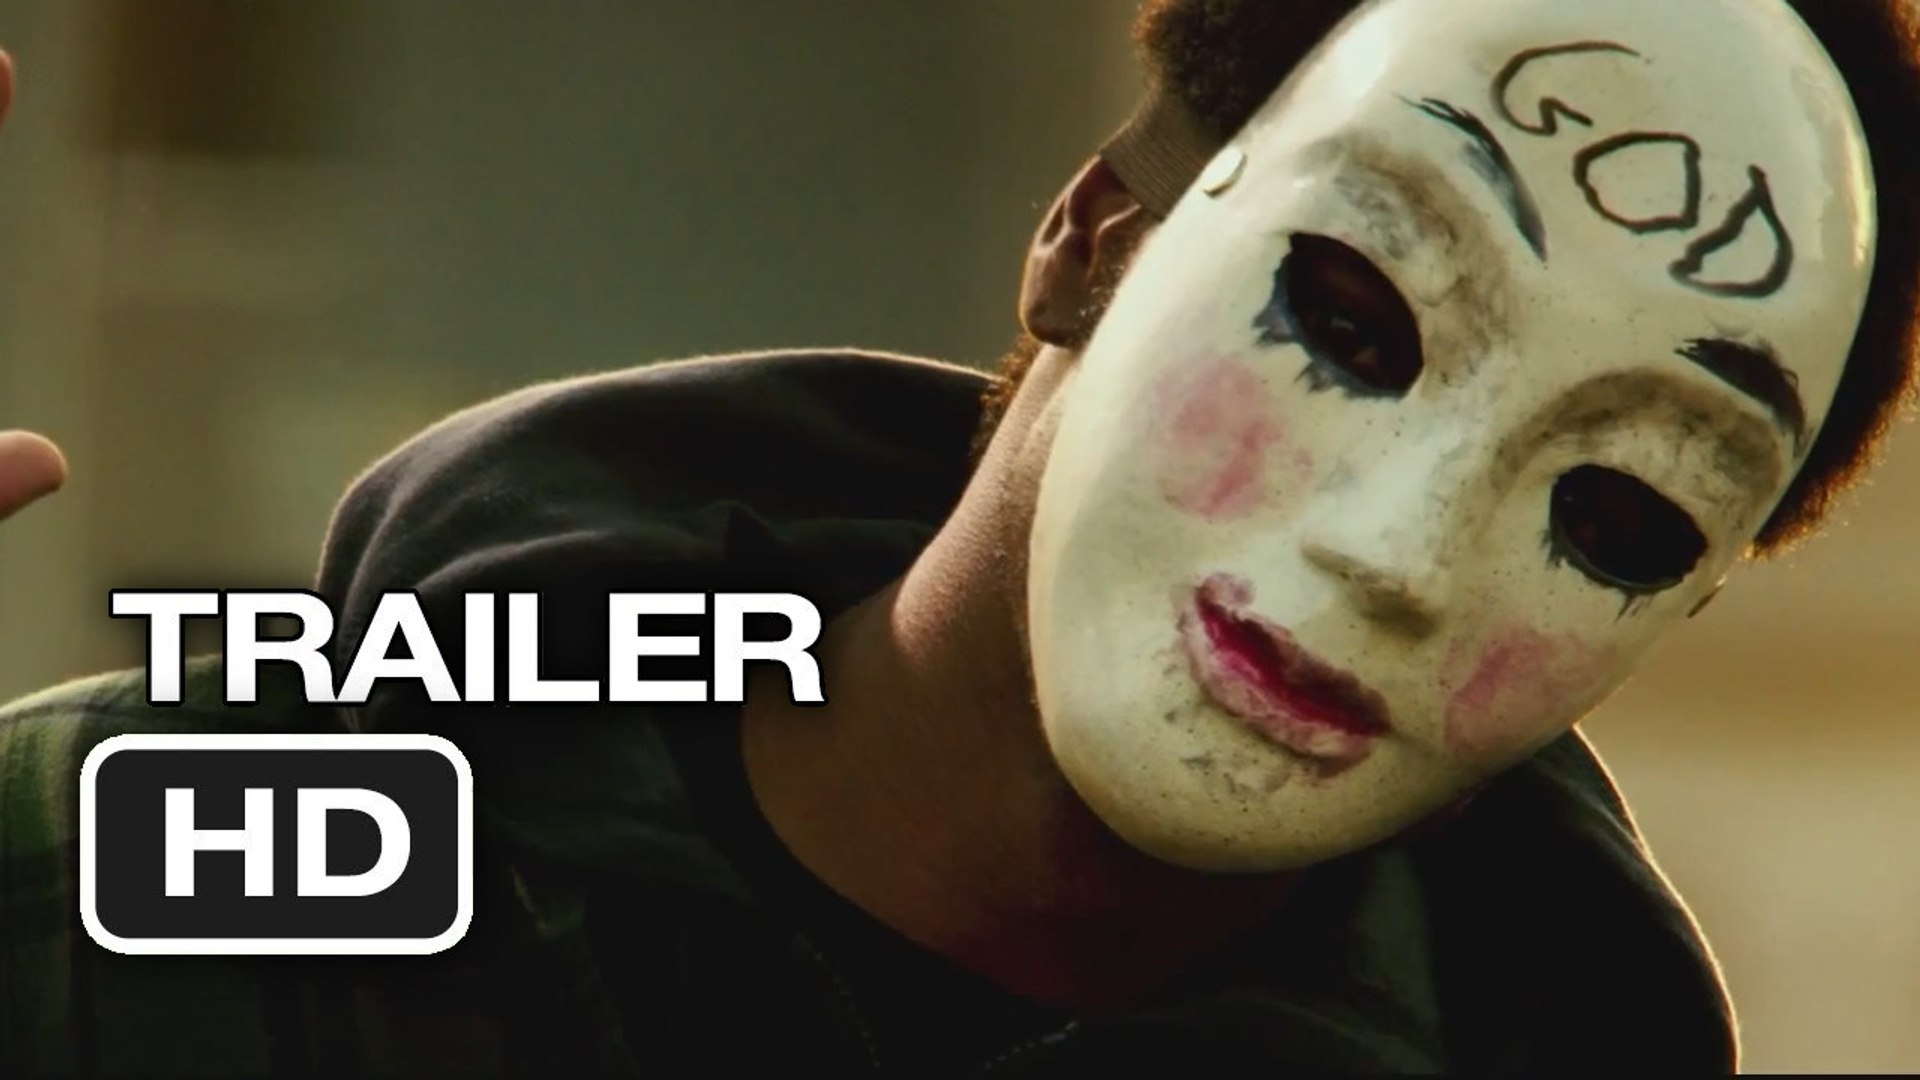 The Purge 2:Anarchy-Trailer #1 (HD) Horror 2014 - Vídeo Dailymotion